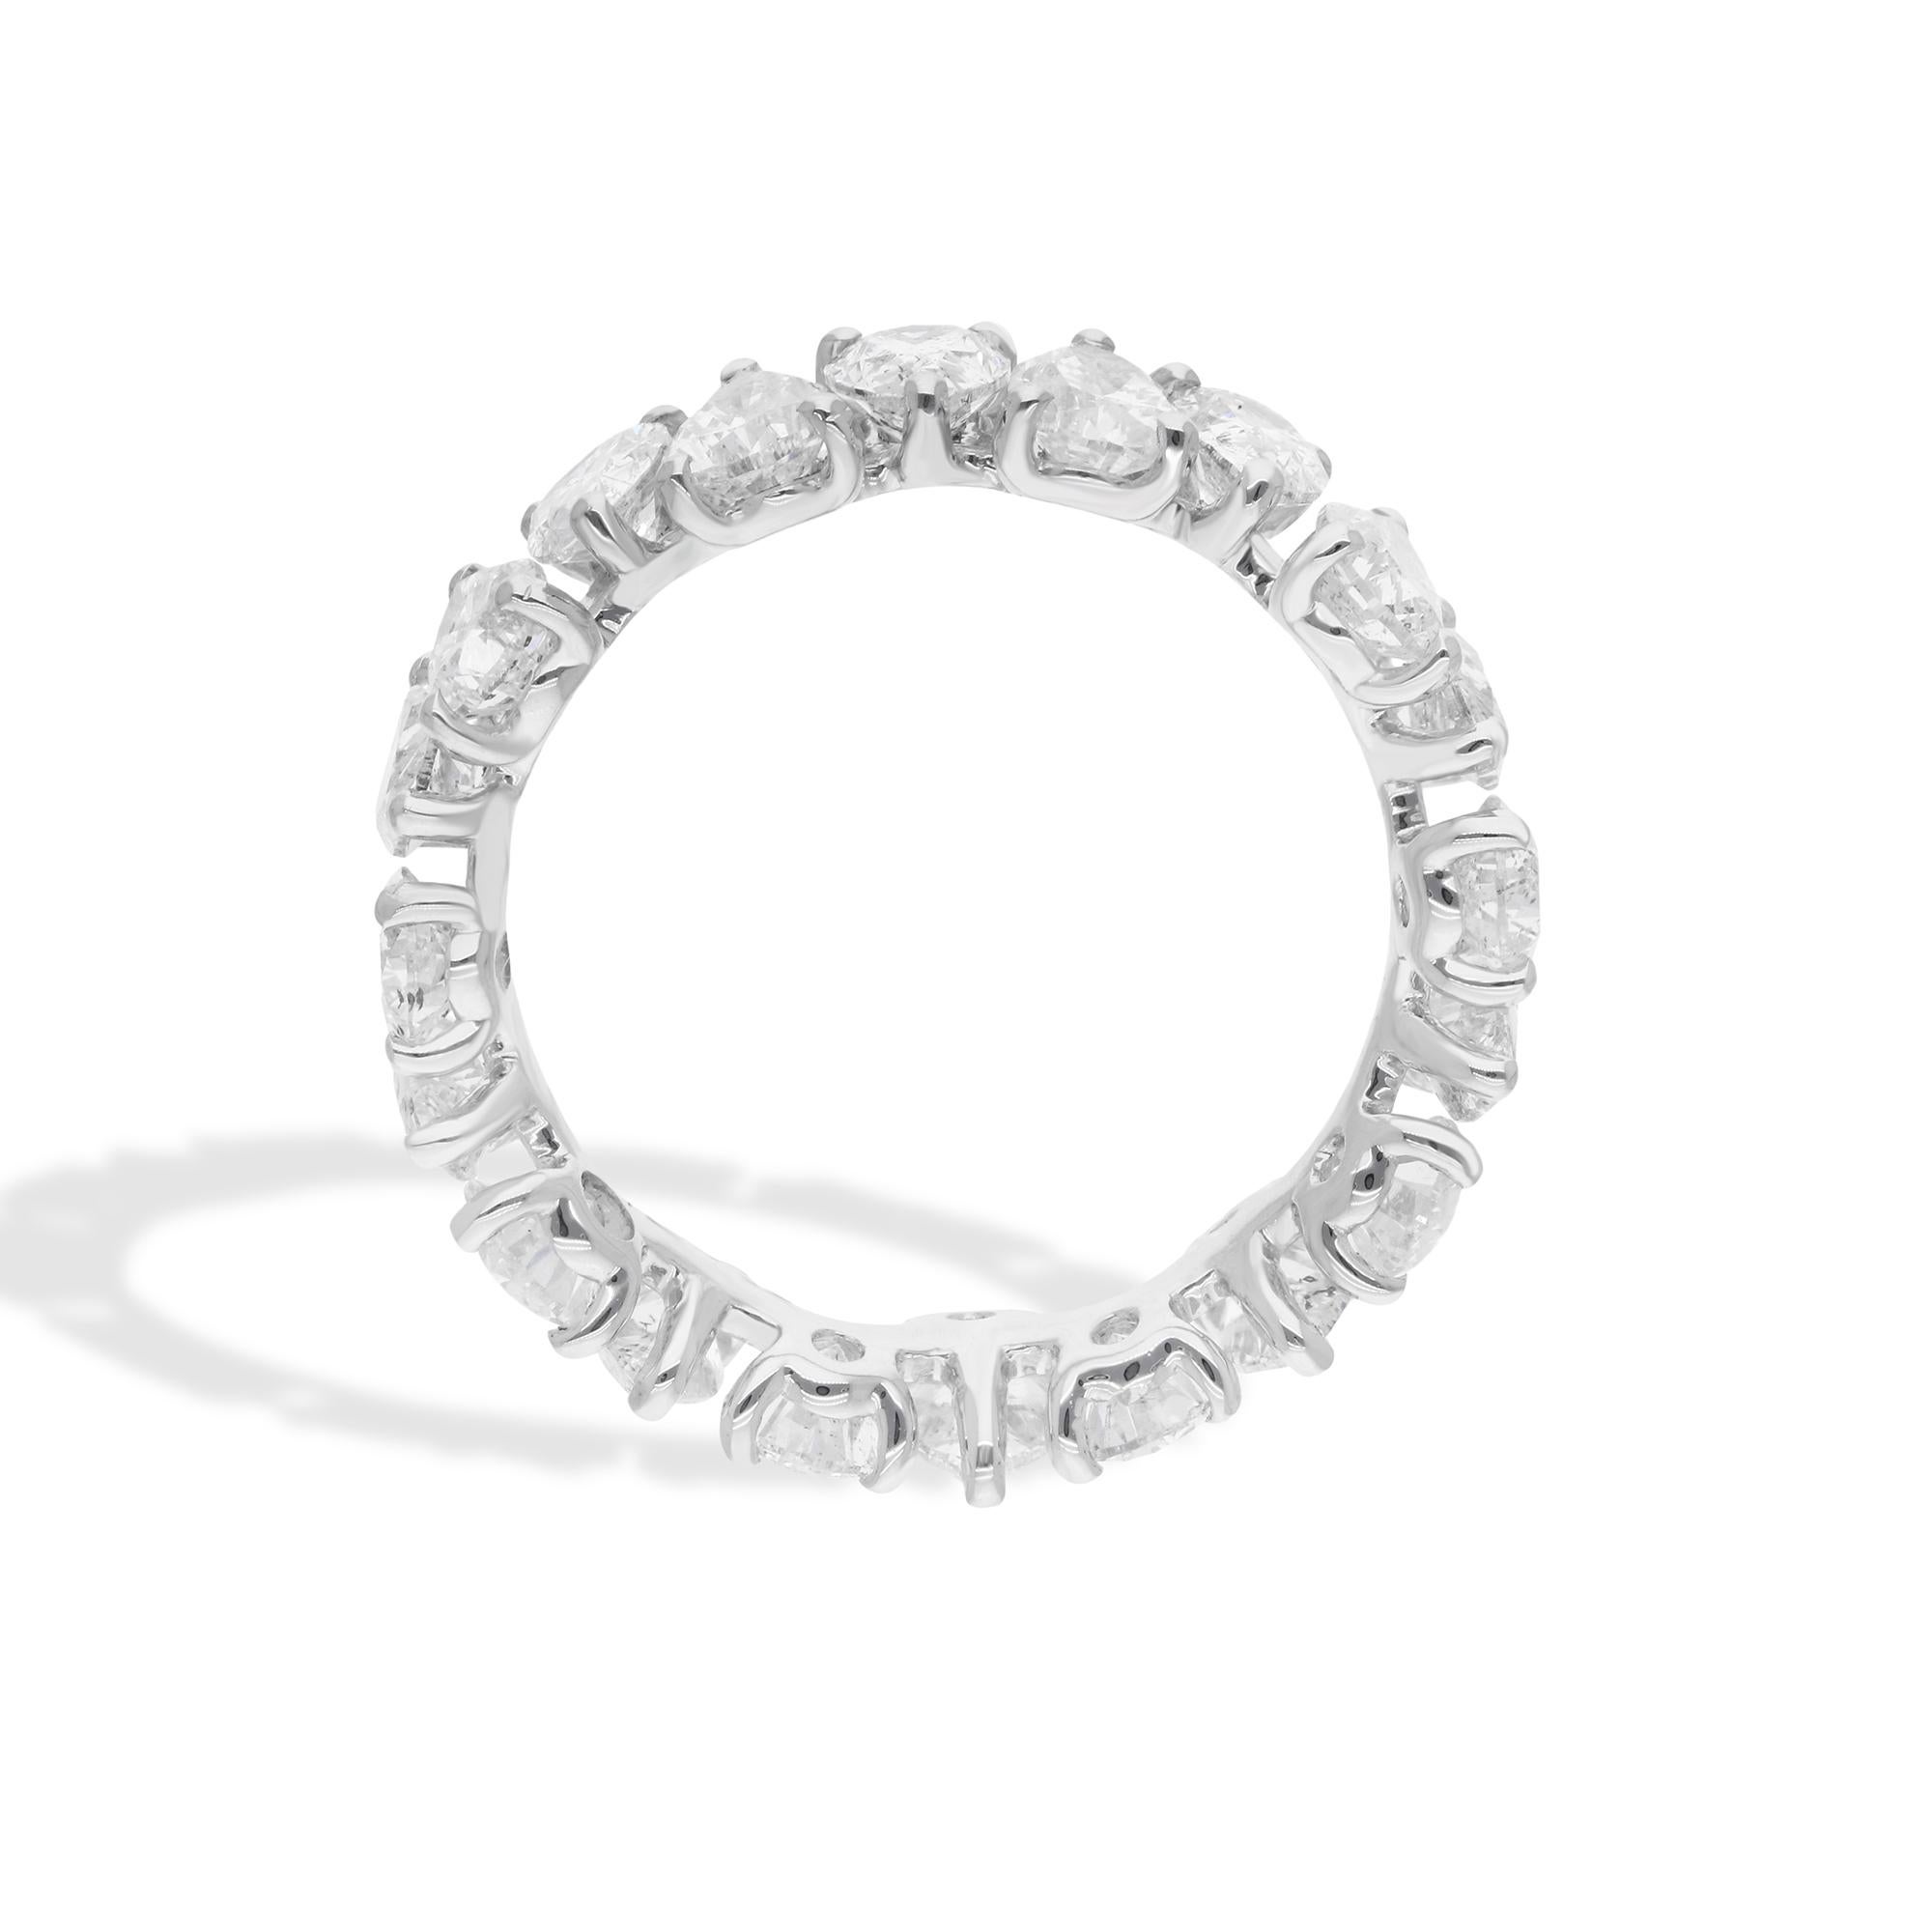 Set in a continuous band of lustrous white gold, these magnificent diamonds encircle the finger in an eternal embrace, symbolizing everlasting love and commitment. The pear-shaped cut of the diamonds adds a touch of sophistication and refinement to